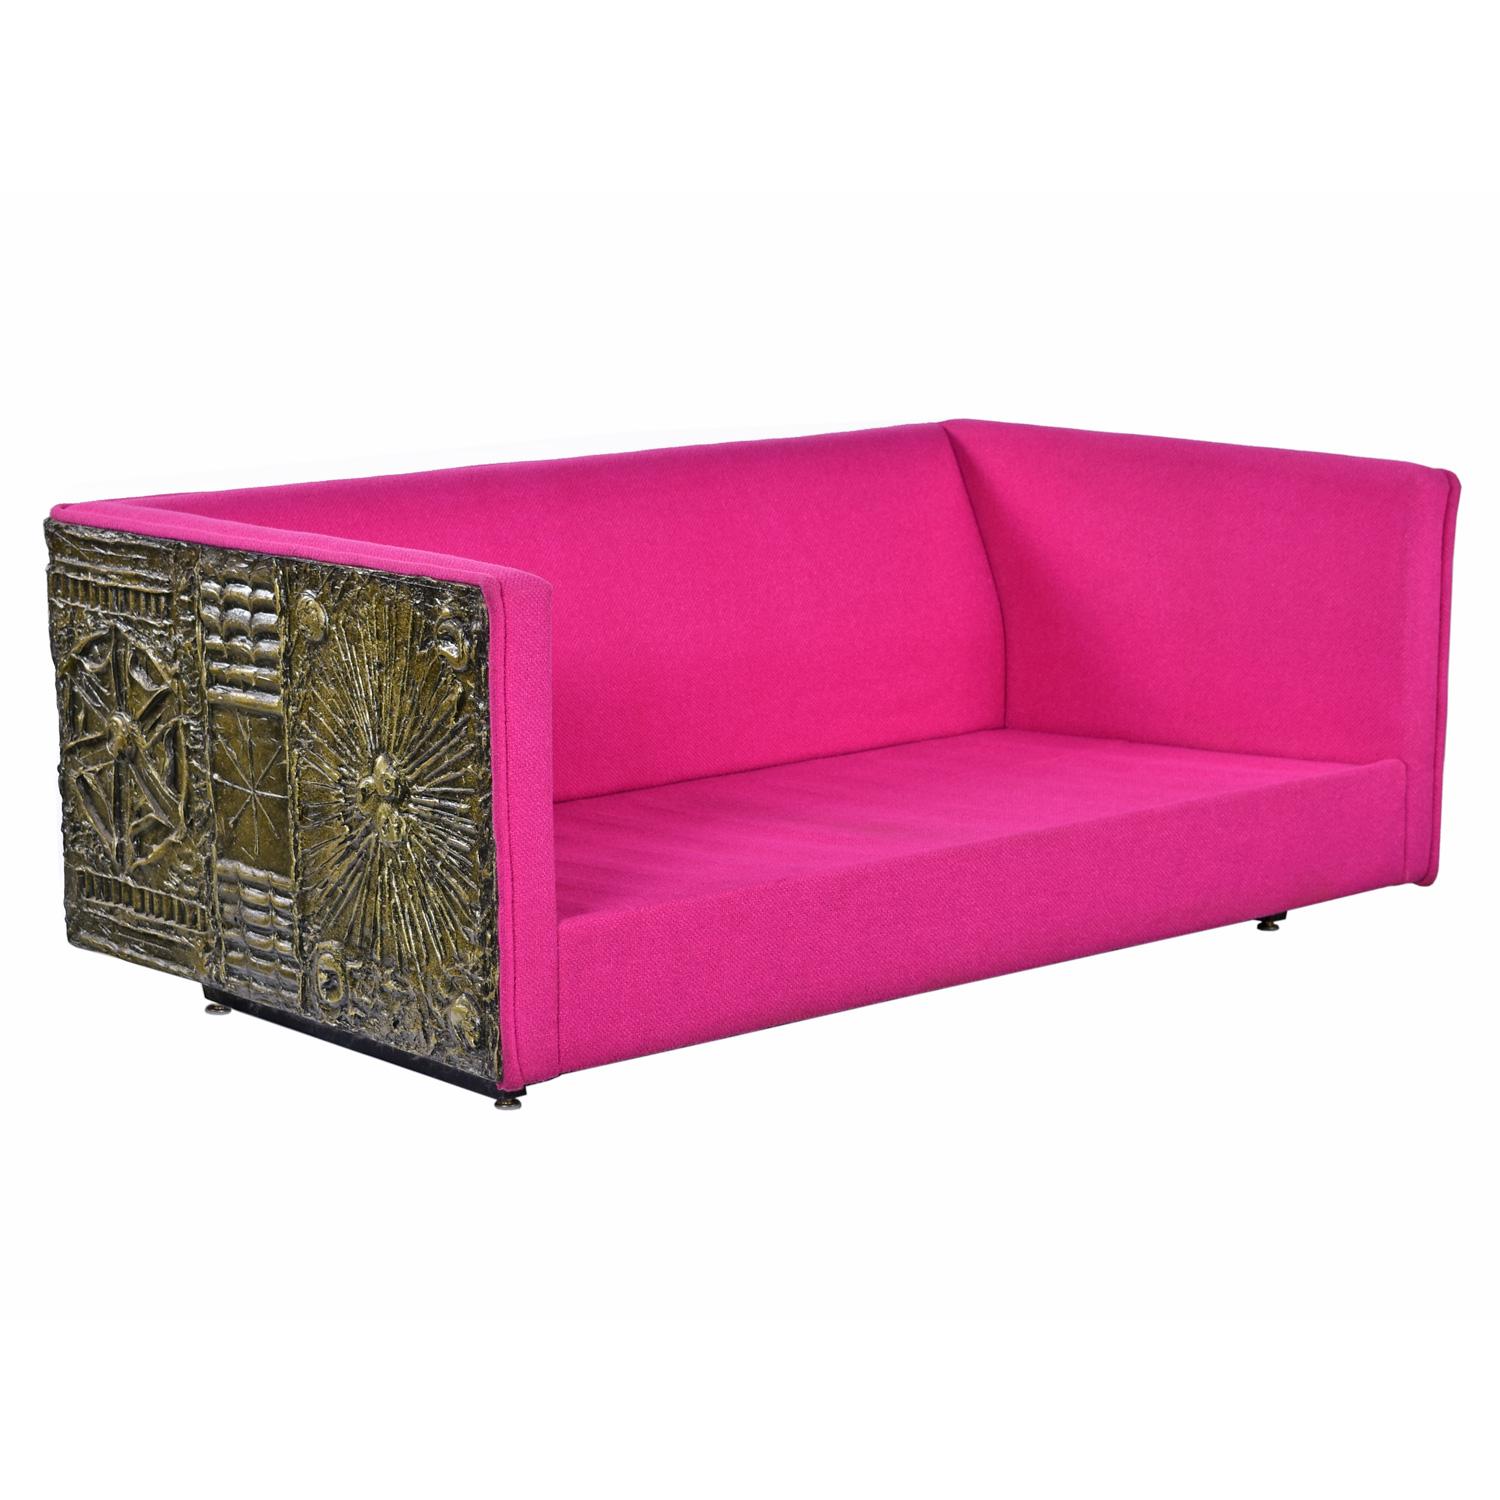 Gold Goop Brutalist Loveseat Sofa by Adrian Pearsall for Craft Associates For Sale 4